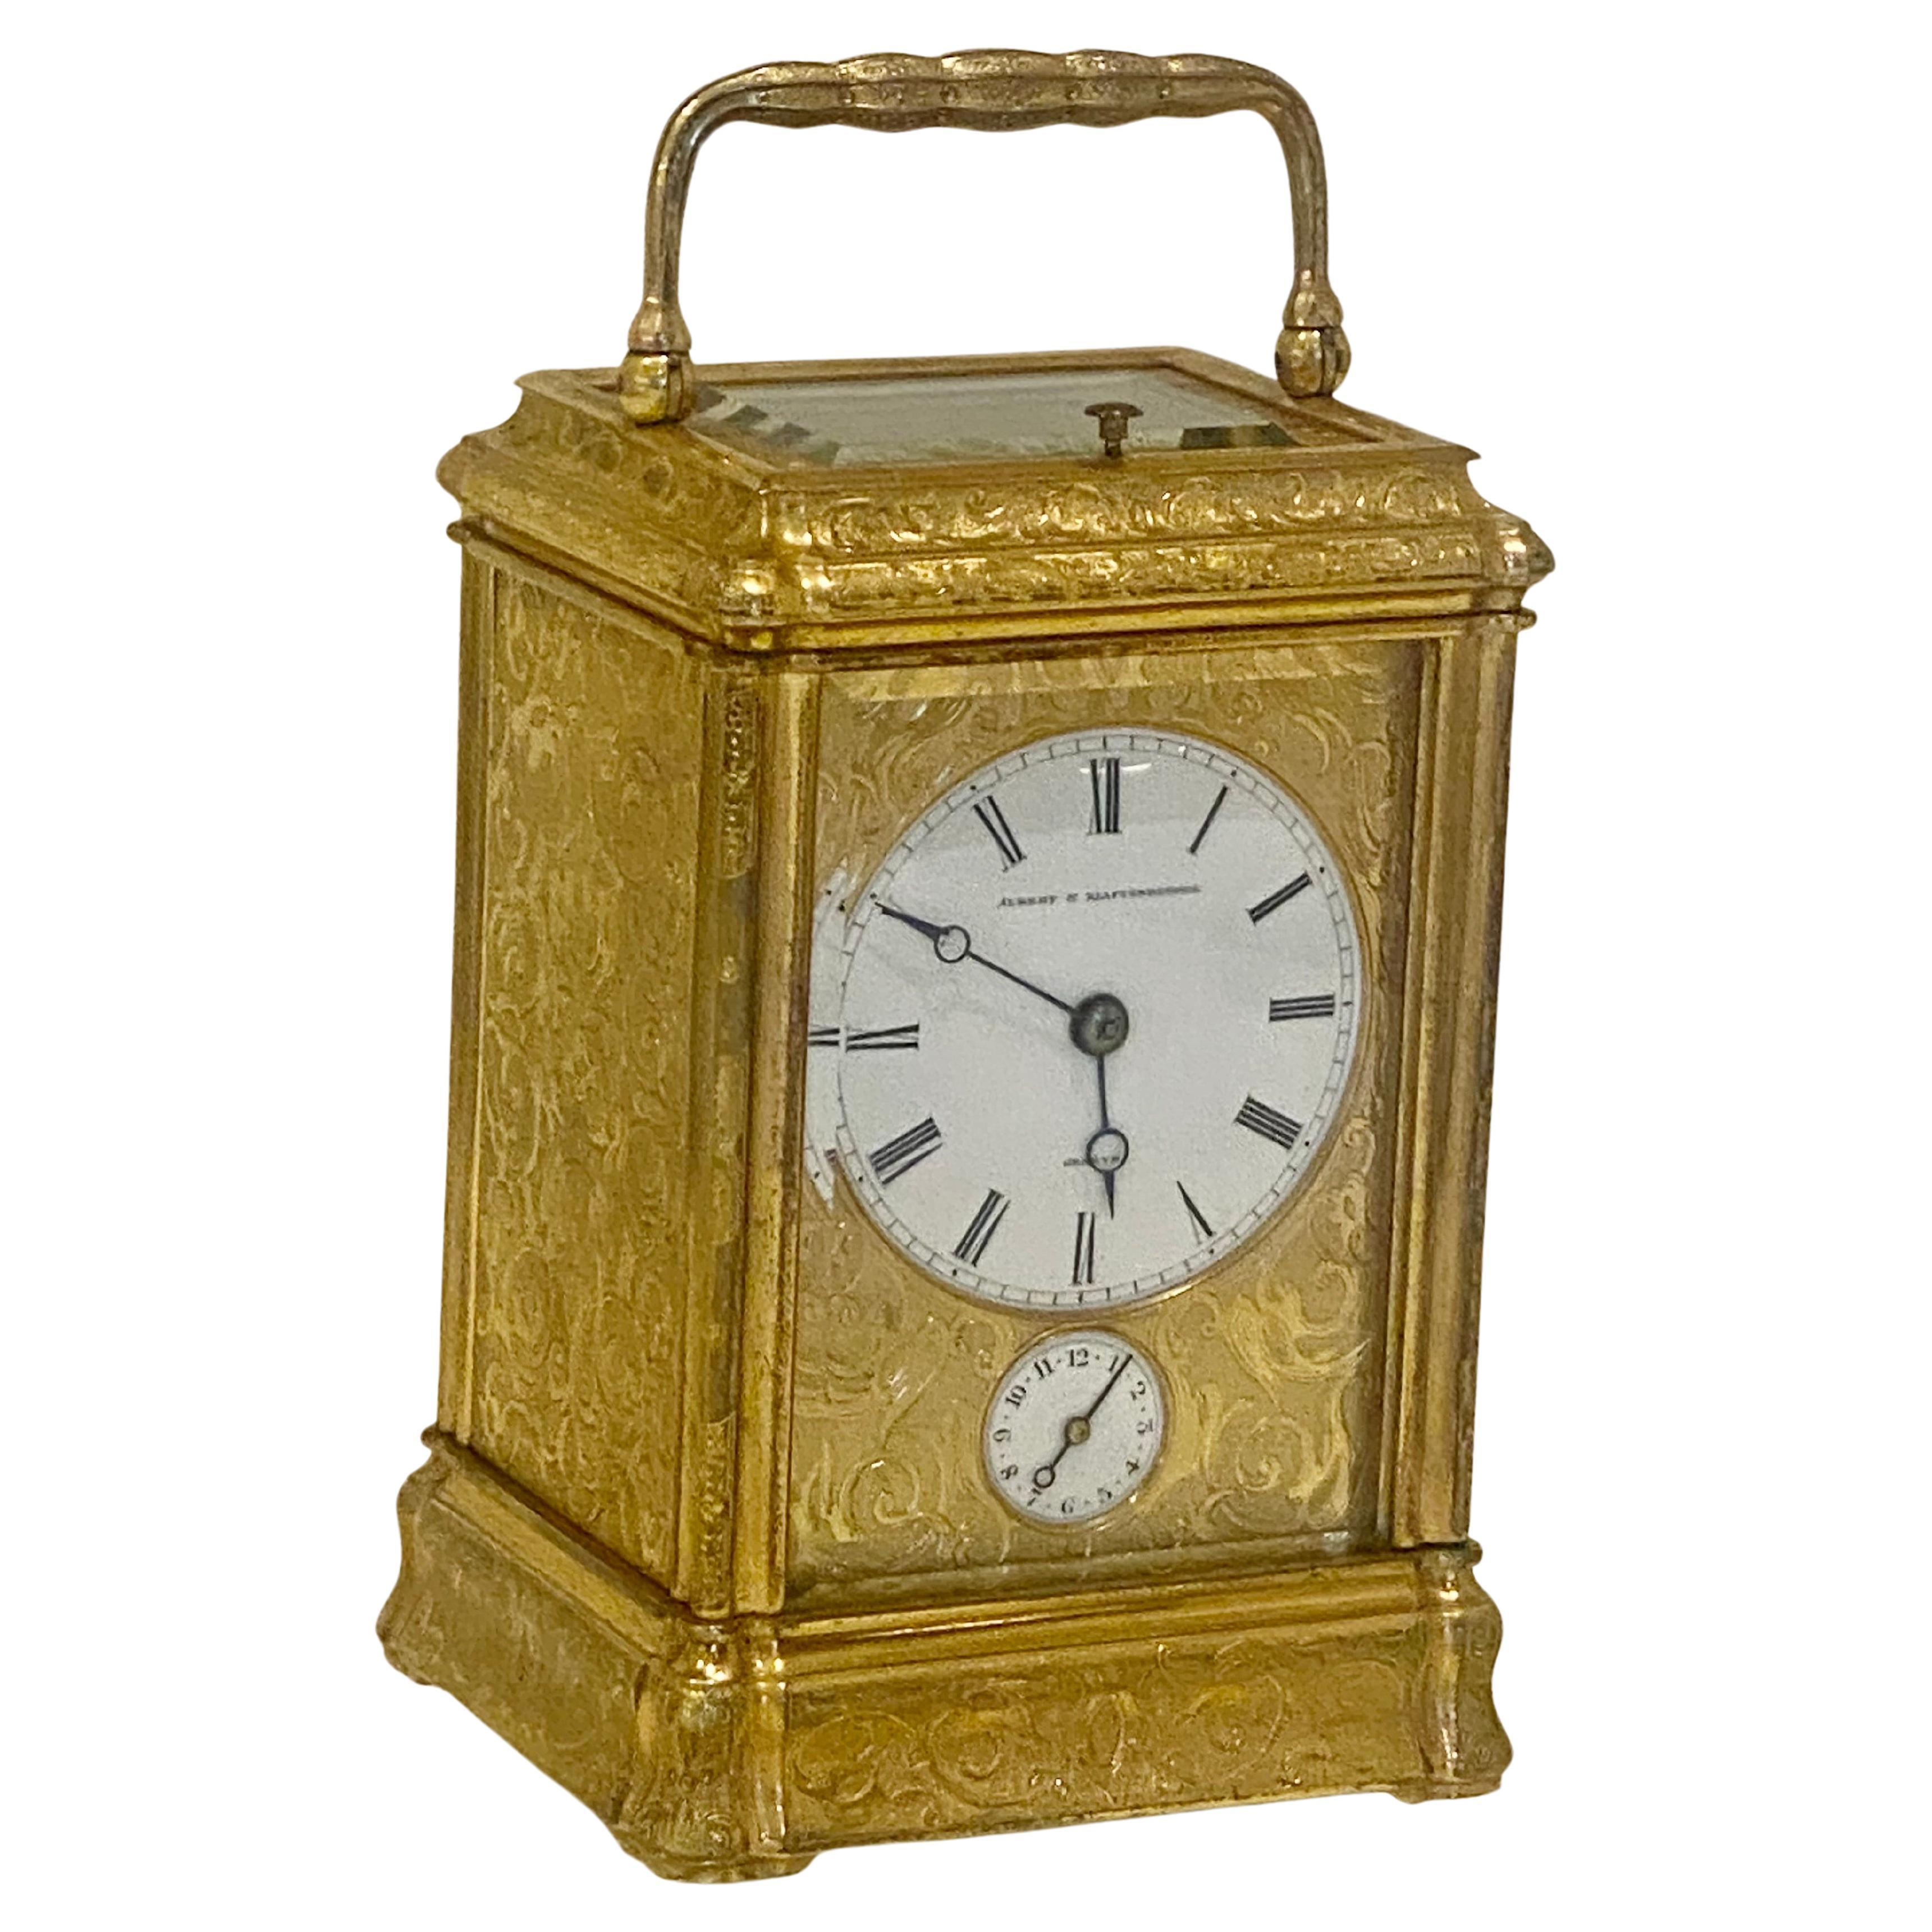 Profusely Engraved to All Sides Gilt Bronze Carriage Clock, circa 1860